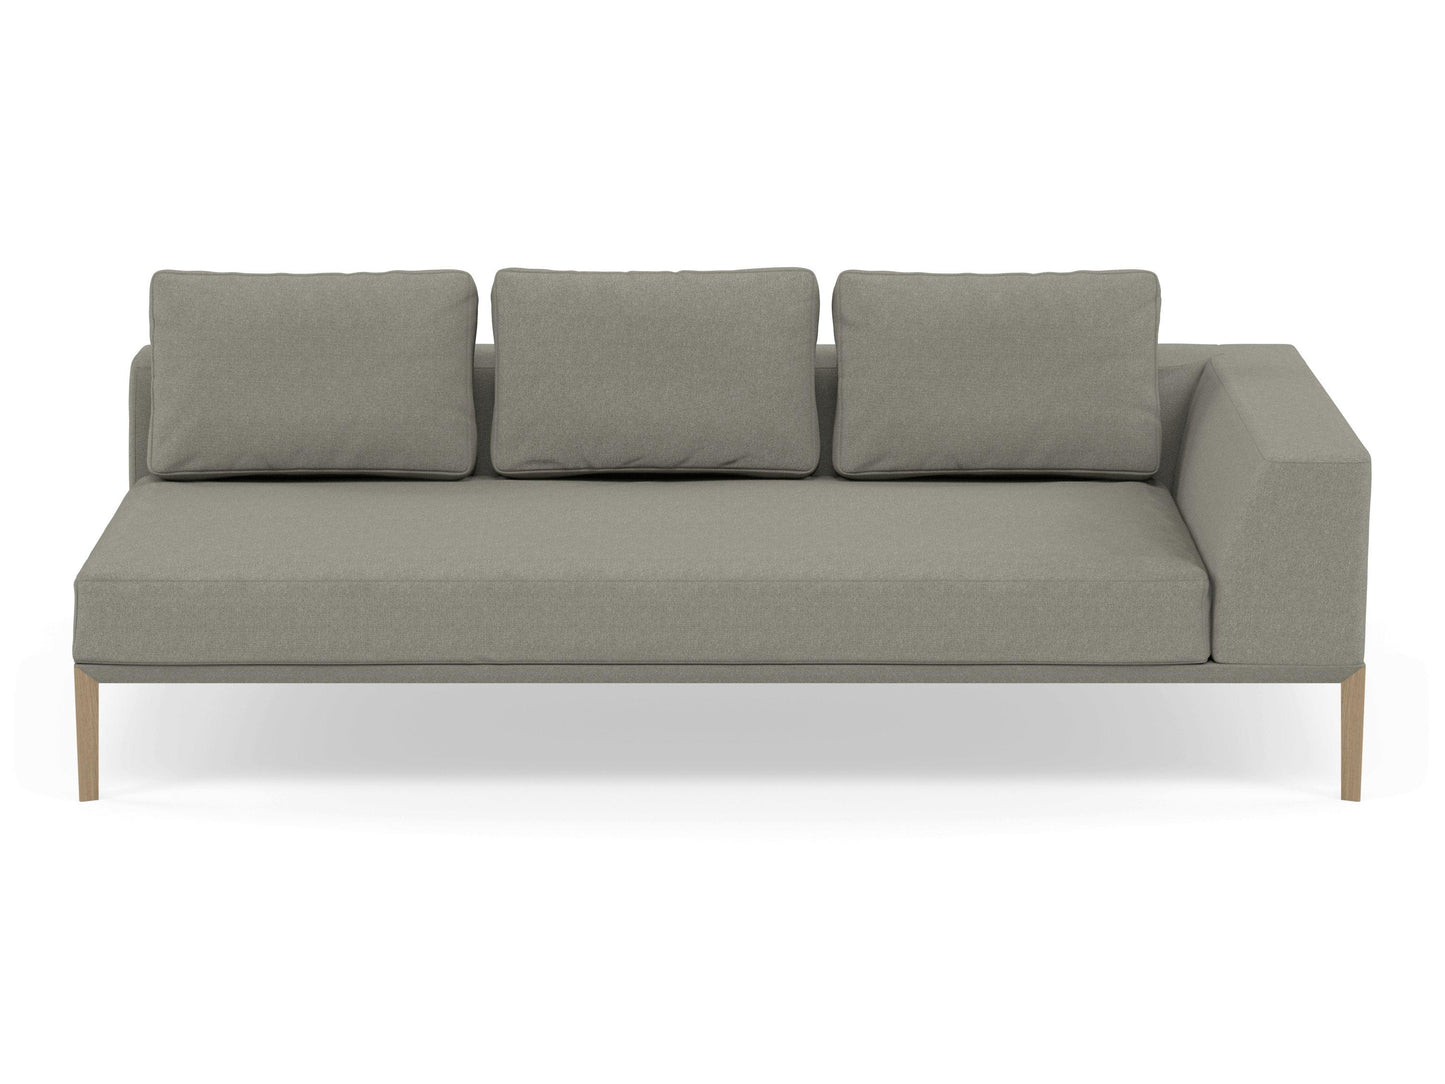 Modern 3 Seater Chaise Lounge Style Sofa with Left Armrest in Silver Grey Fabric-Natural Oak-Distinct Designs (London) Ltd